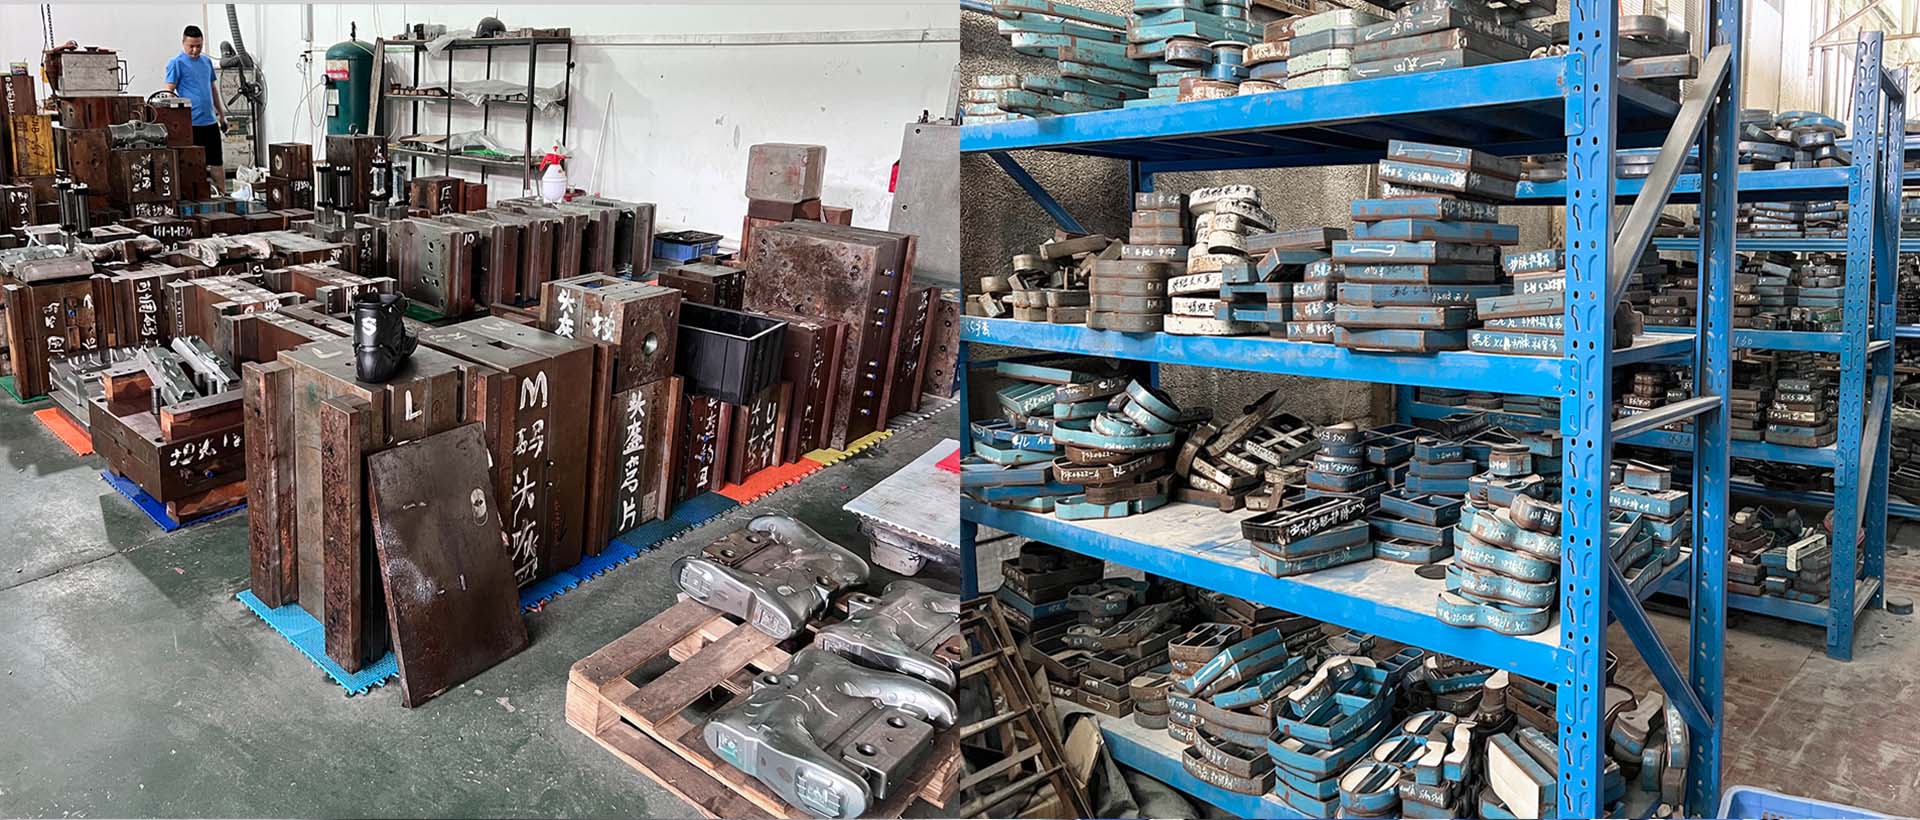 High quality Mold & Cutting Die storage area.Supplier,Factory,Manufacturers in China